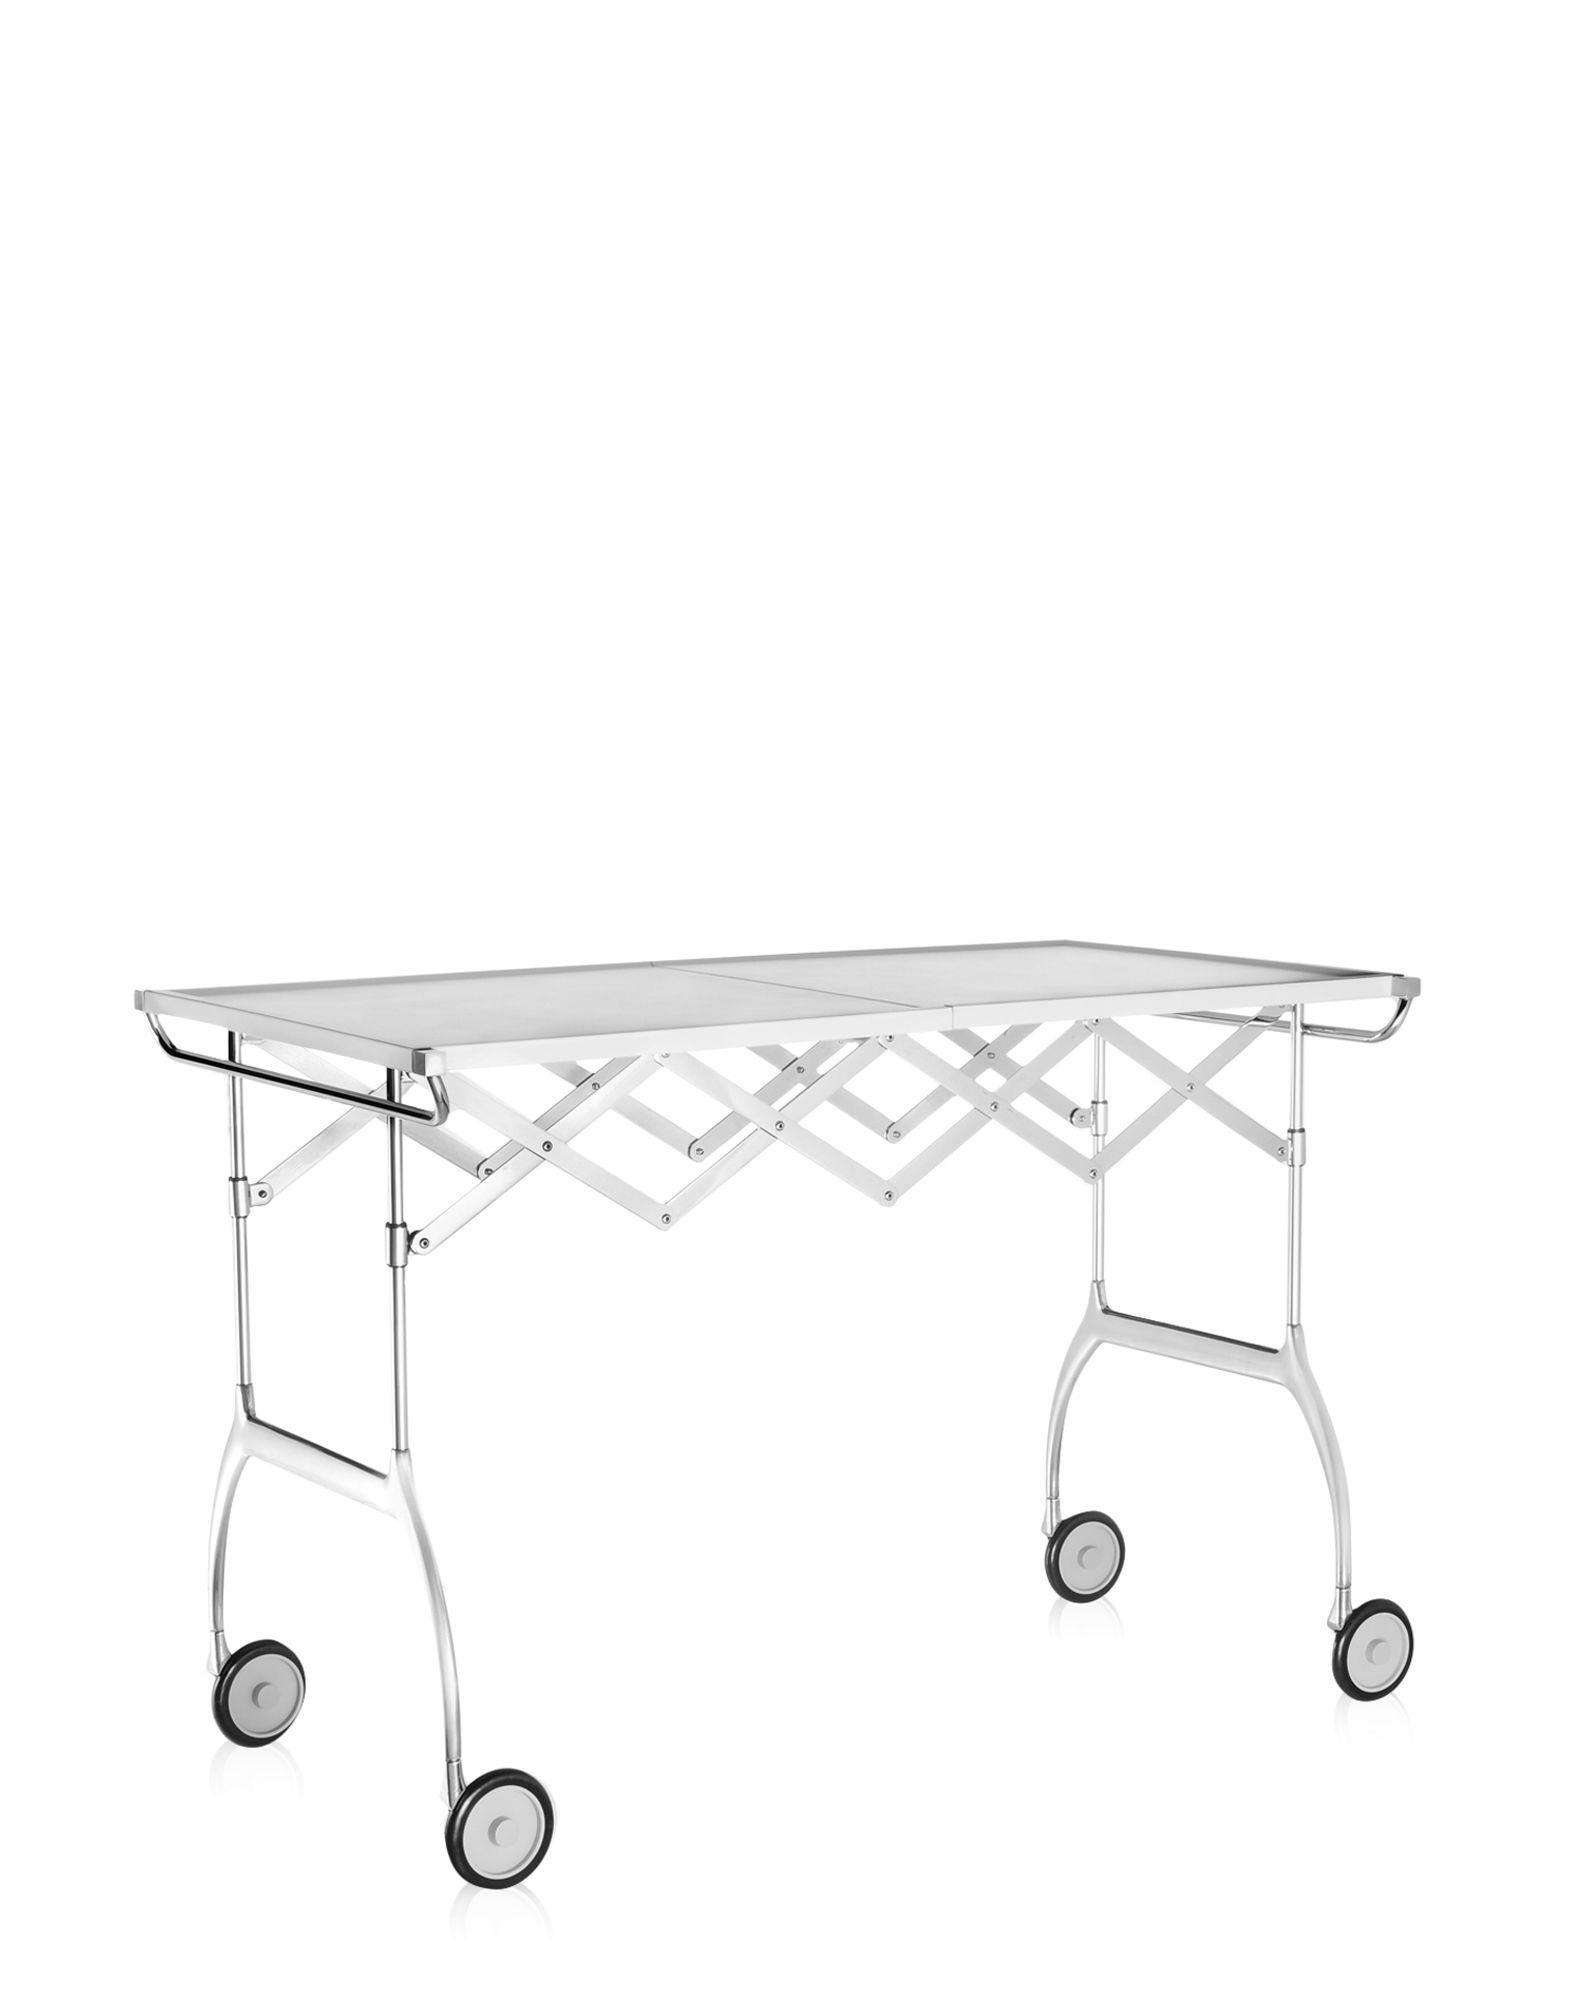 Besides being a practical trolley with a striking combination of plastic and metal components, Battista is an all-out extendible and folding table, ideal for buffets and aperitifs or as a small single table.

Dimensions: Height: 21.25 in.; Width: